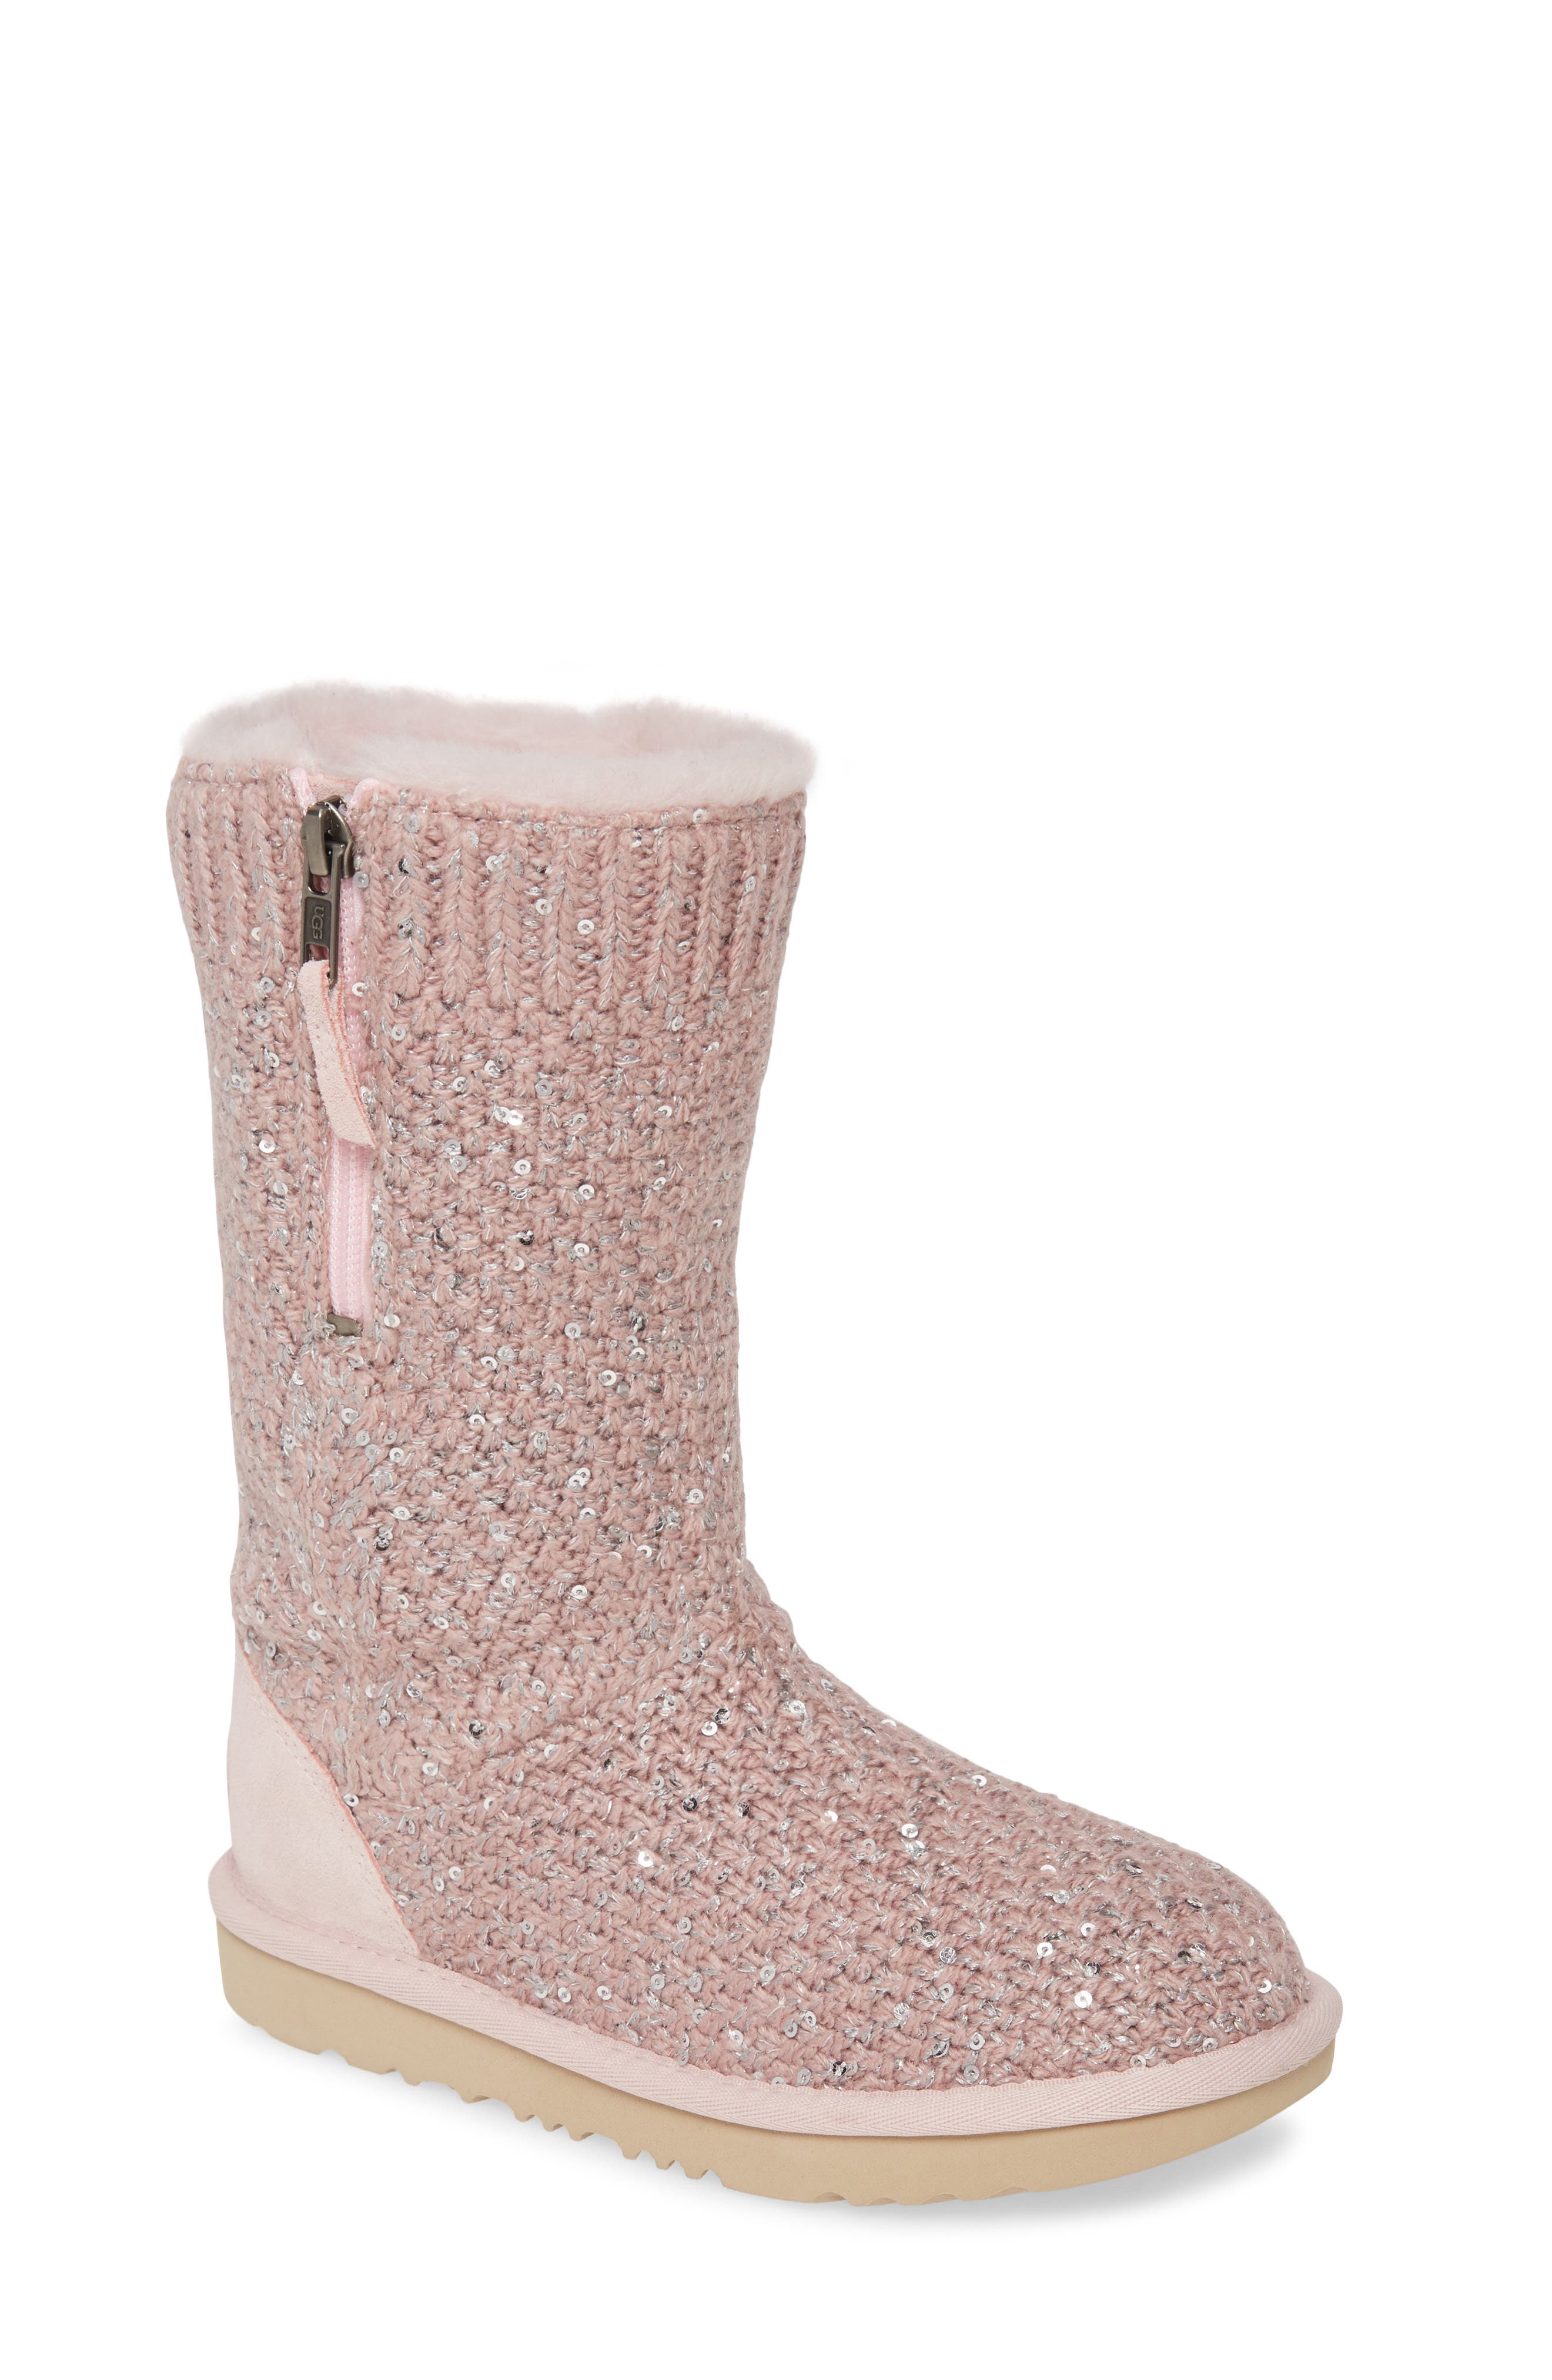 Ugg Kids' Girl's Sequin Knit Boot In 